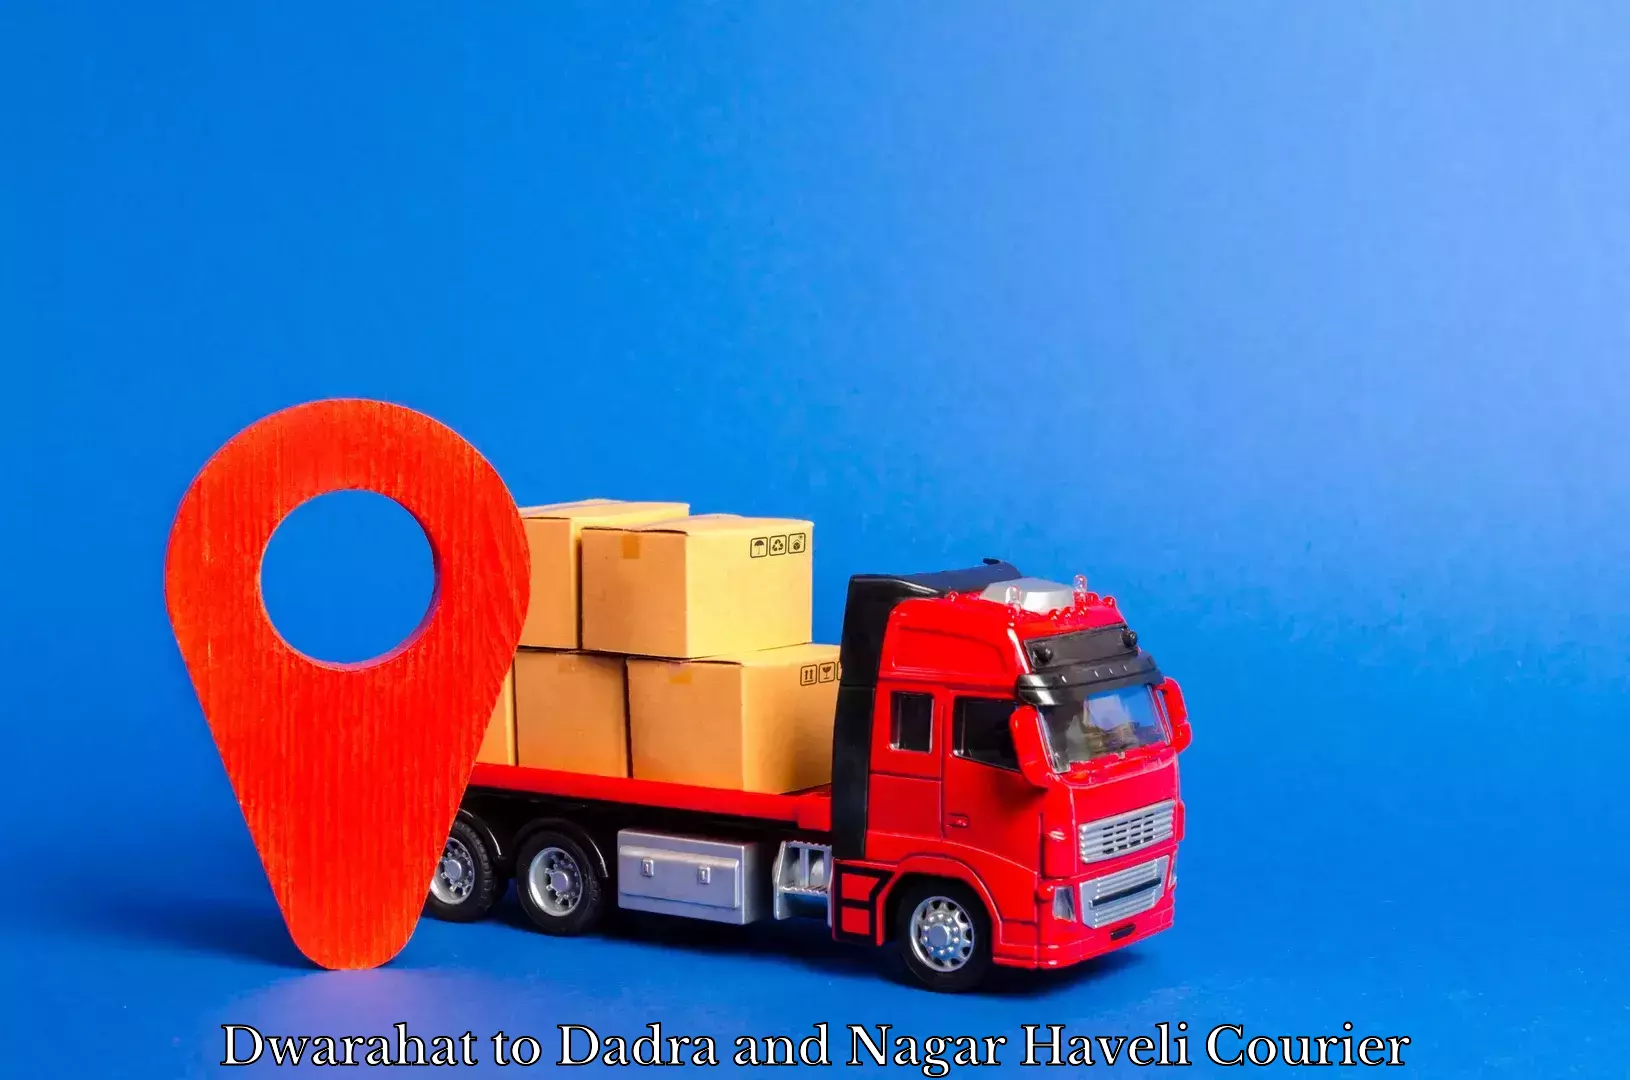 Parcel handling and care Dwarahat to Dadra and Nagar Haveli